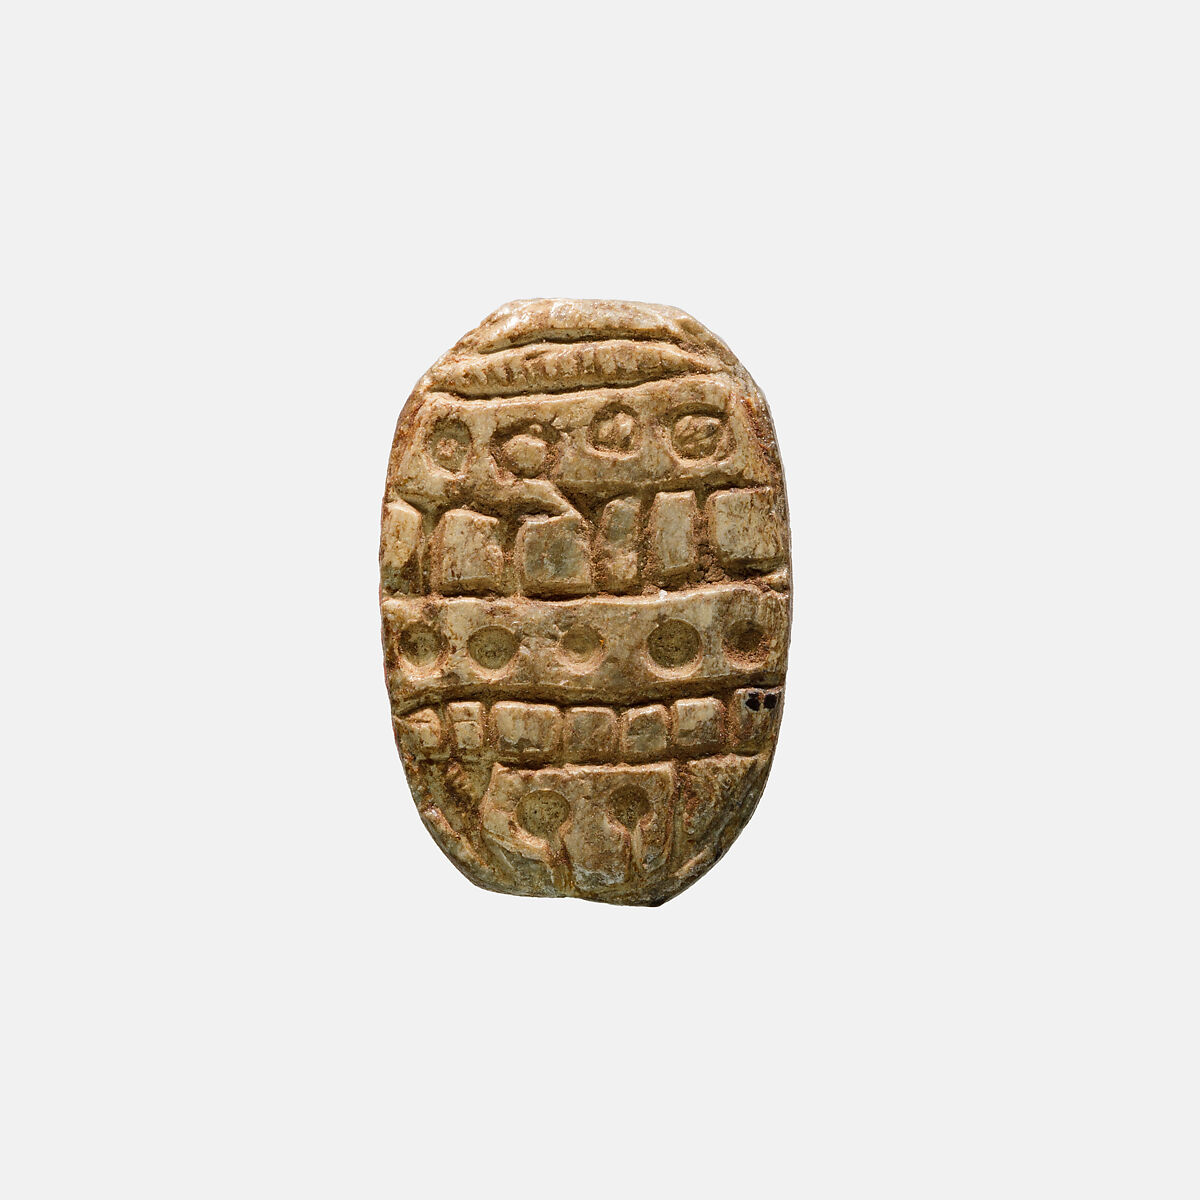 Cowroid Stamp Seal from Ruiu's Burial, Steatite (glazed) 